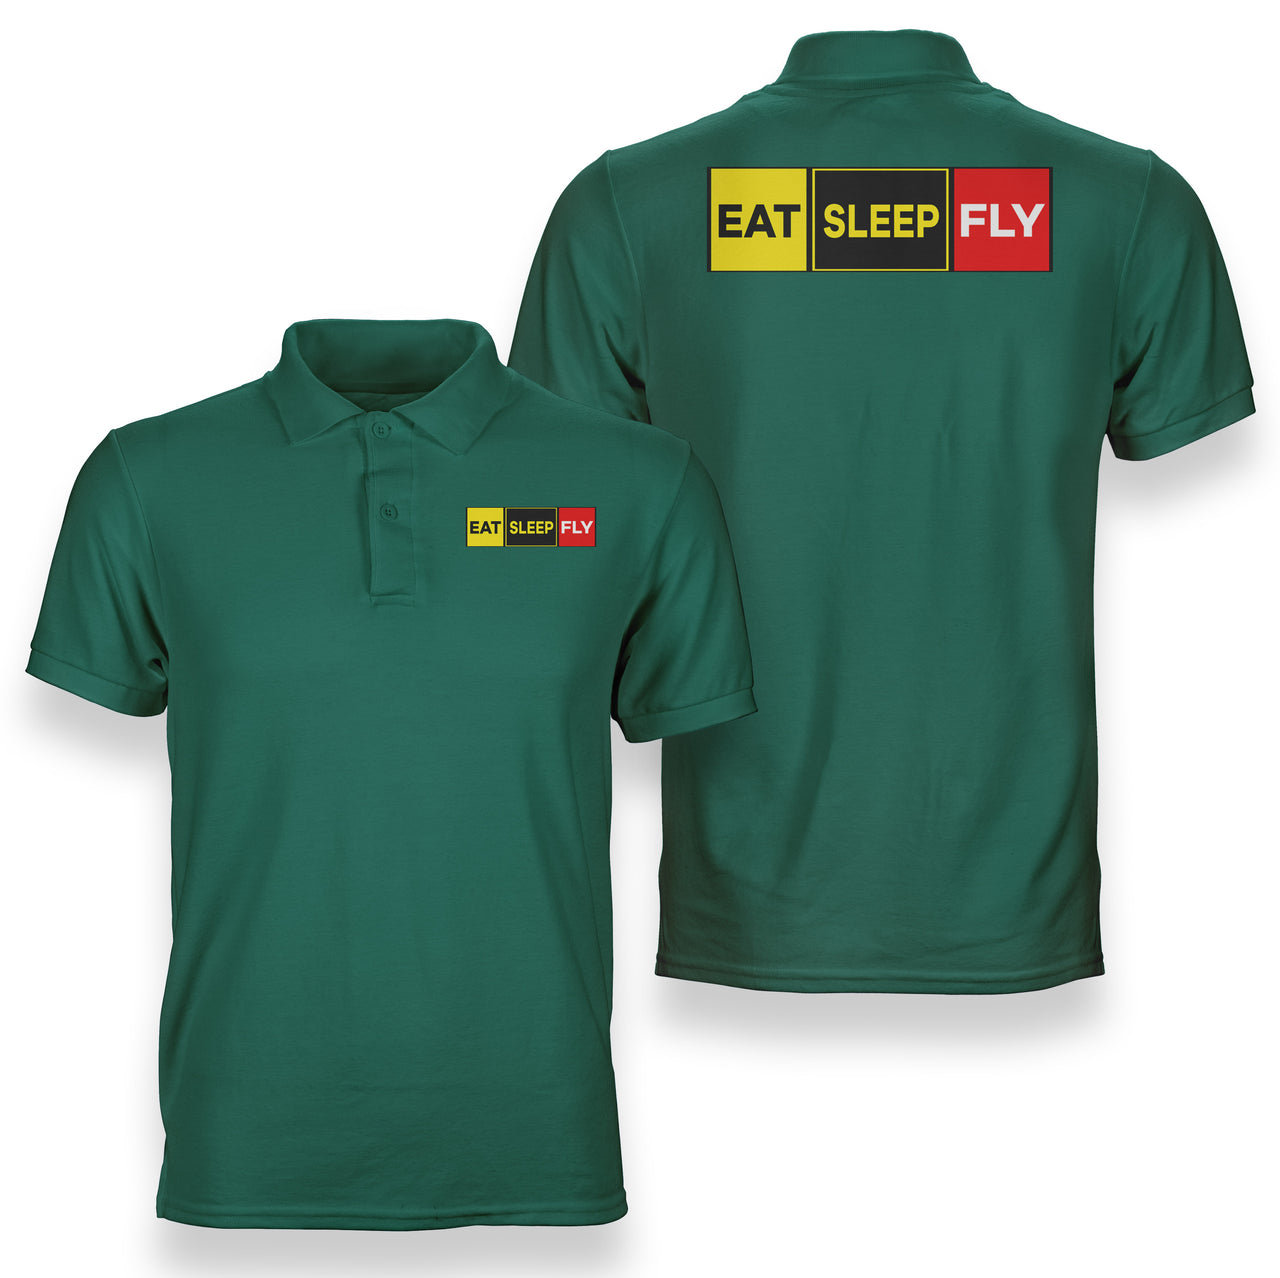 Eat Sleep Fly (Colourful) Designed Double Side Polo T-Shirts